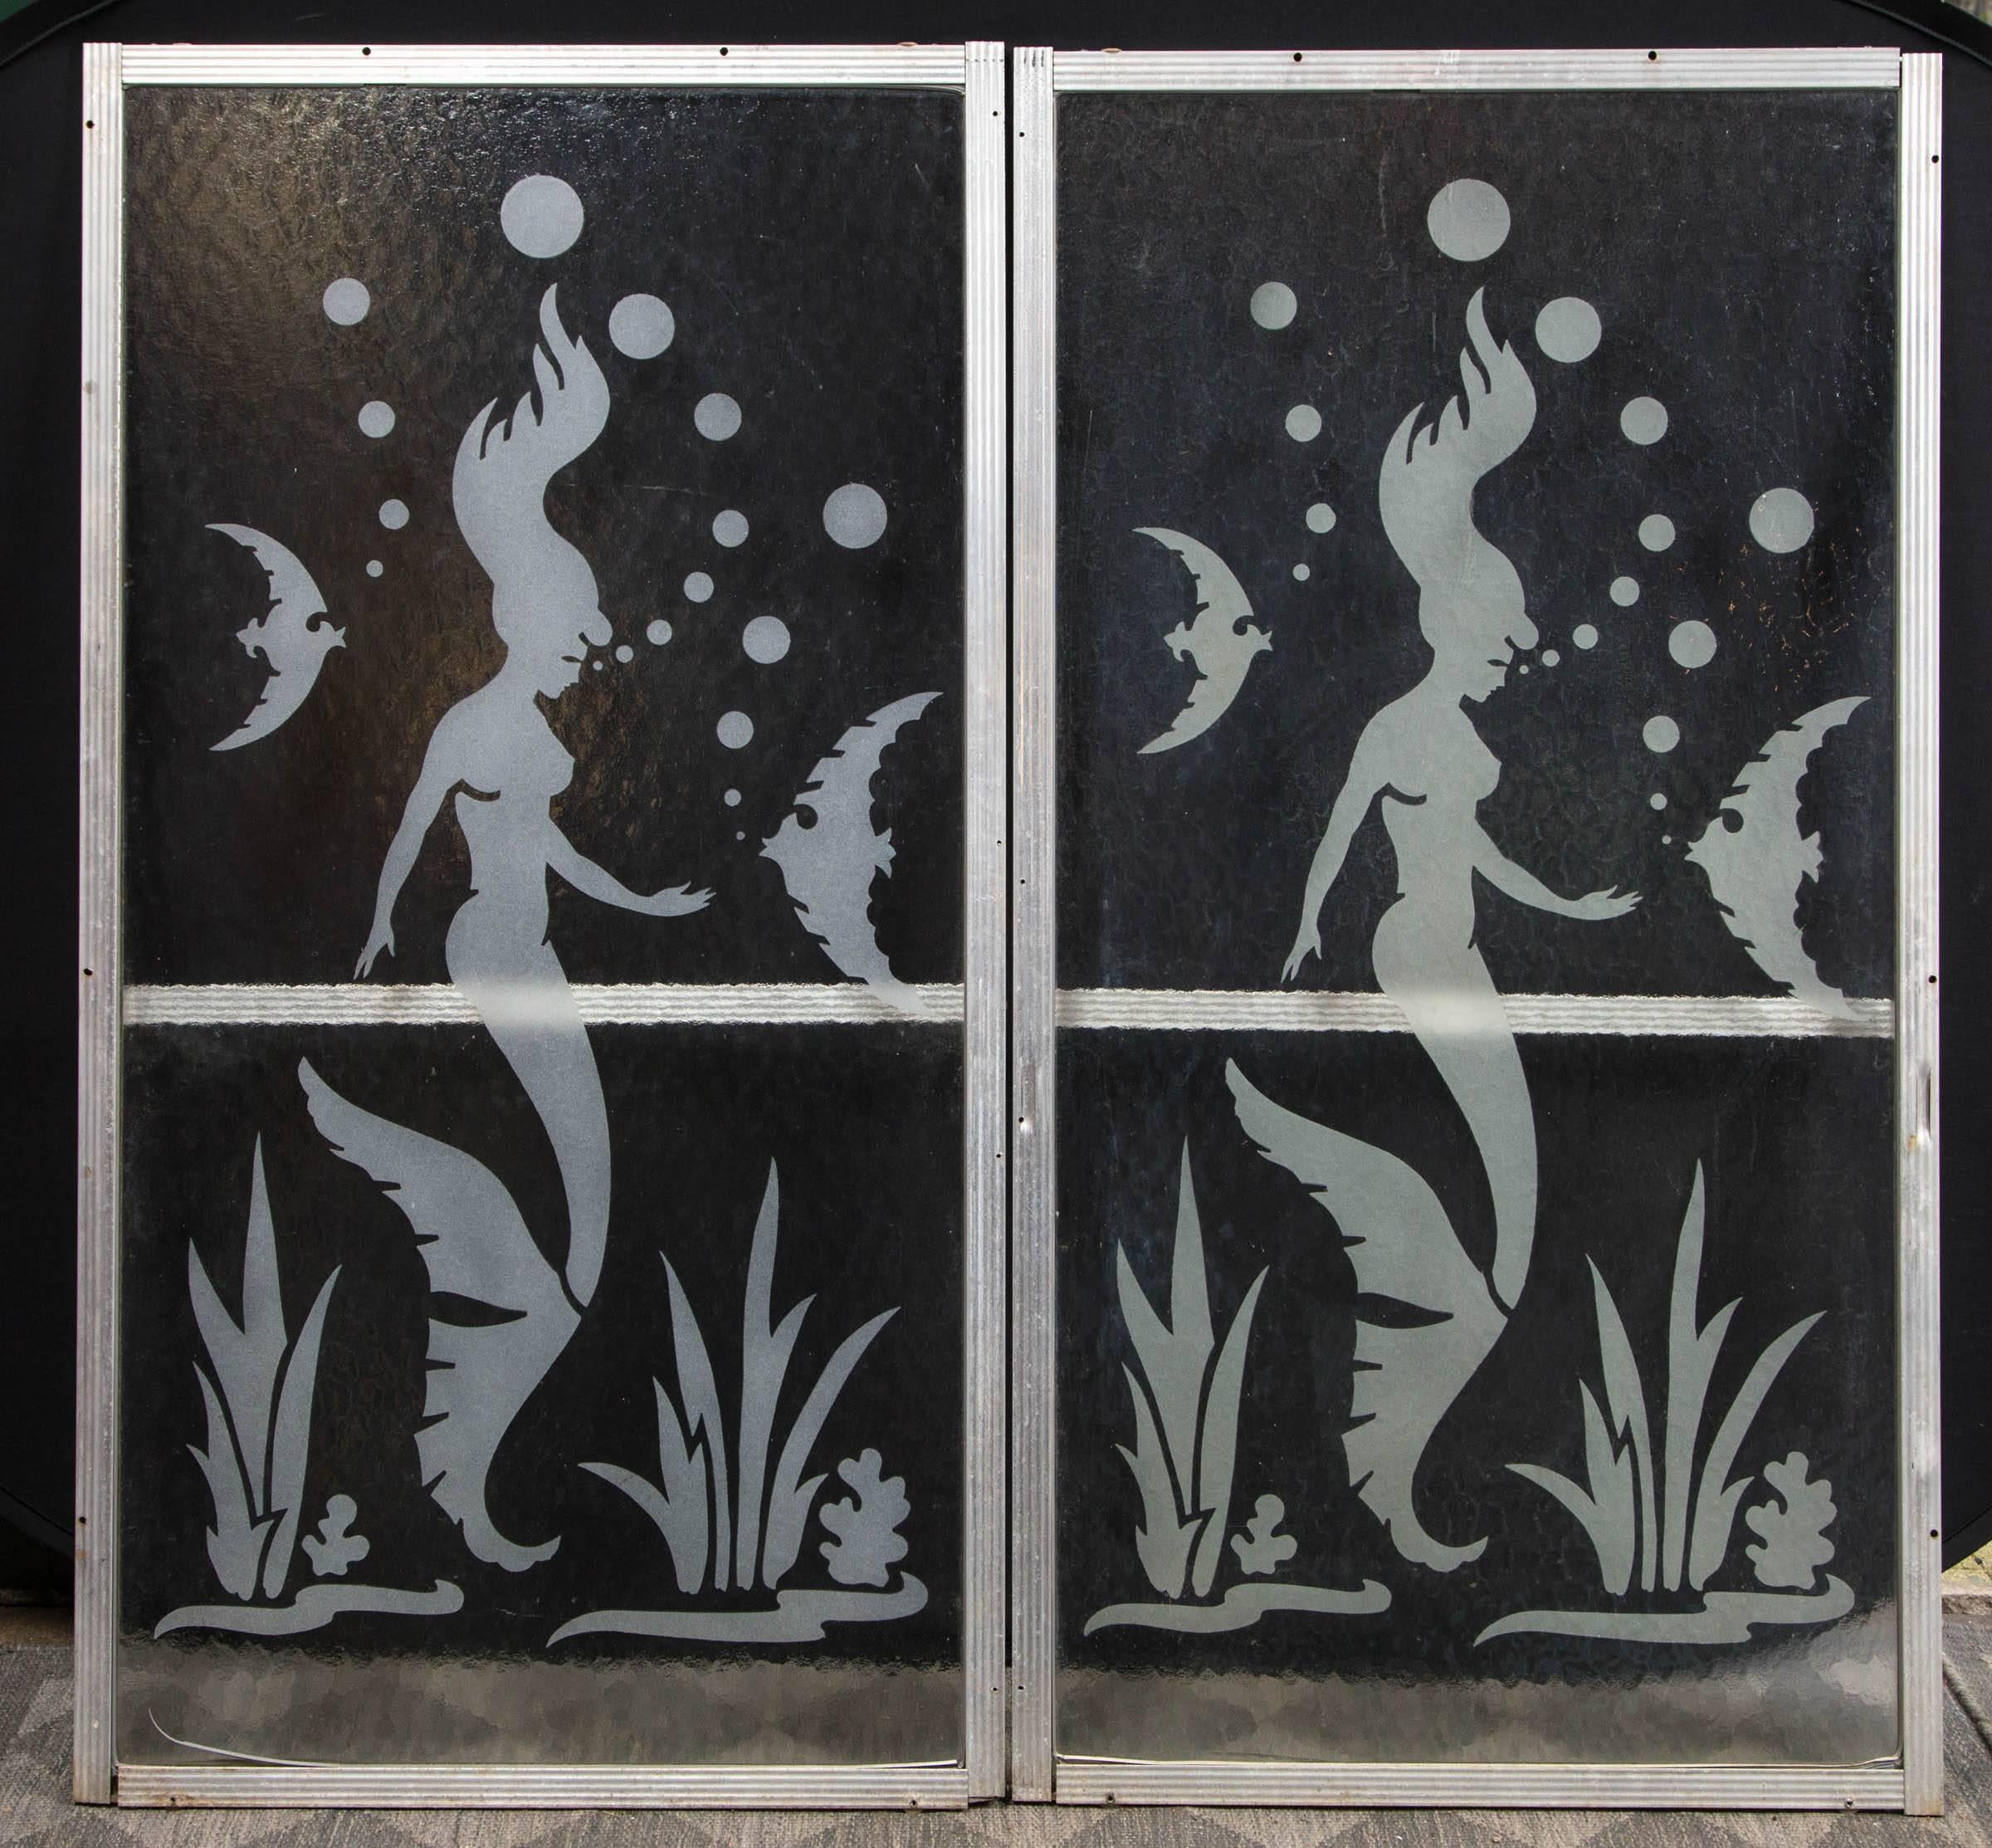 Fabulous mermaid images on a pair of glass panels. The dimensions given are for one glass panel
minus the aluminum frame. Aluminum frames are 1.25 inches wide. Hammered finish on glass.